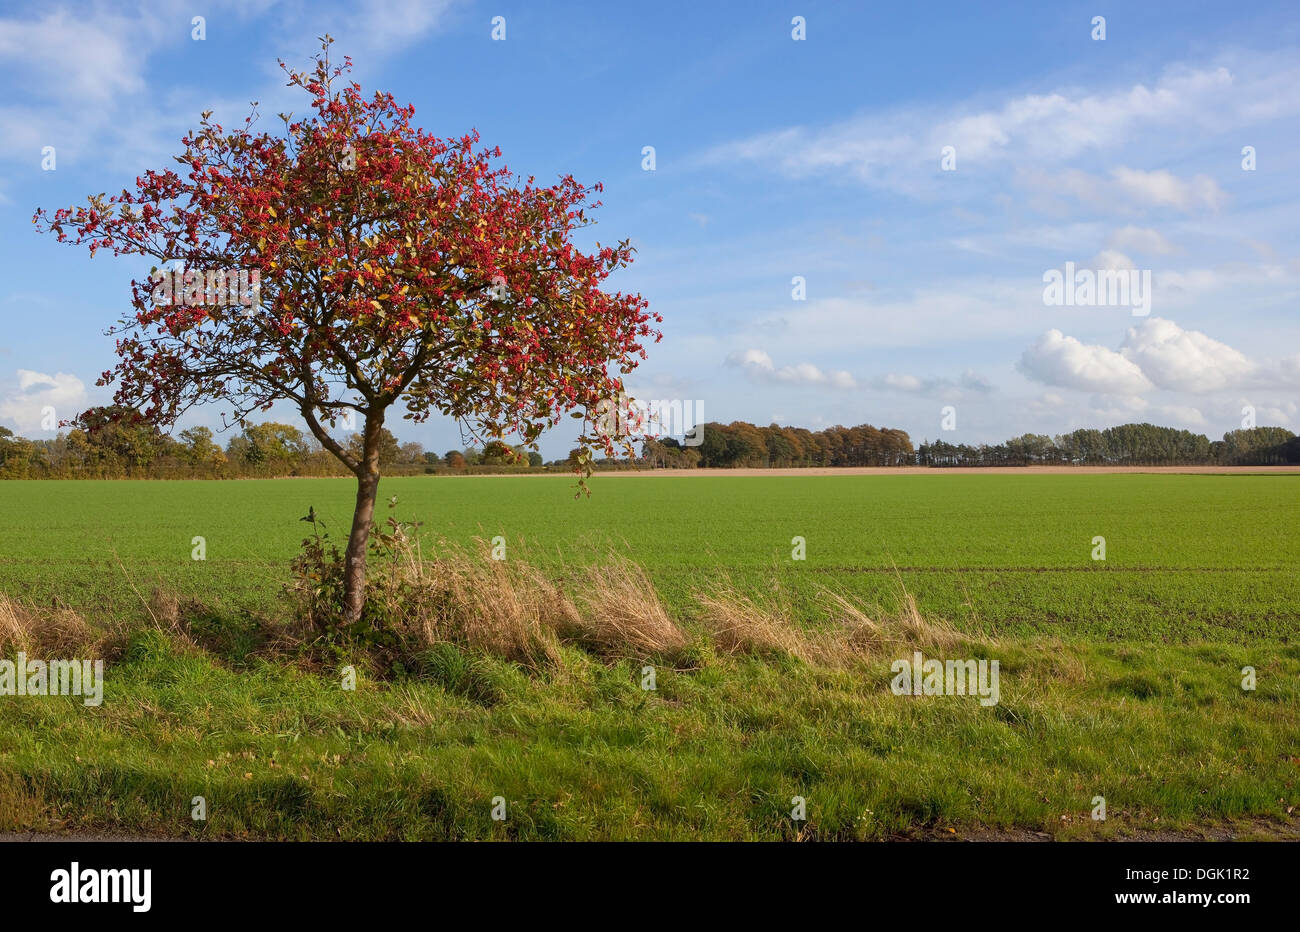 A colorful Whitebeam tree, Latin name Sorbus aria beside a field of young wheat on a grassy verge under a blue sky in autumn Stock Photo